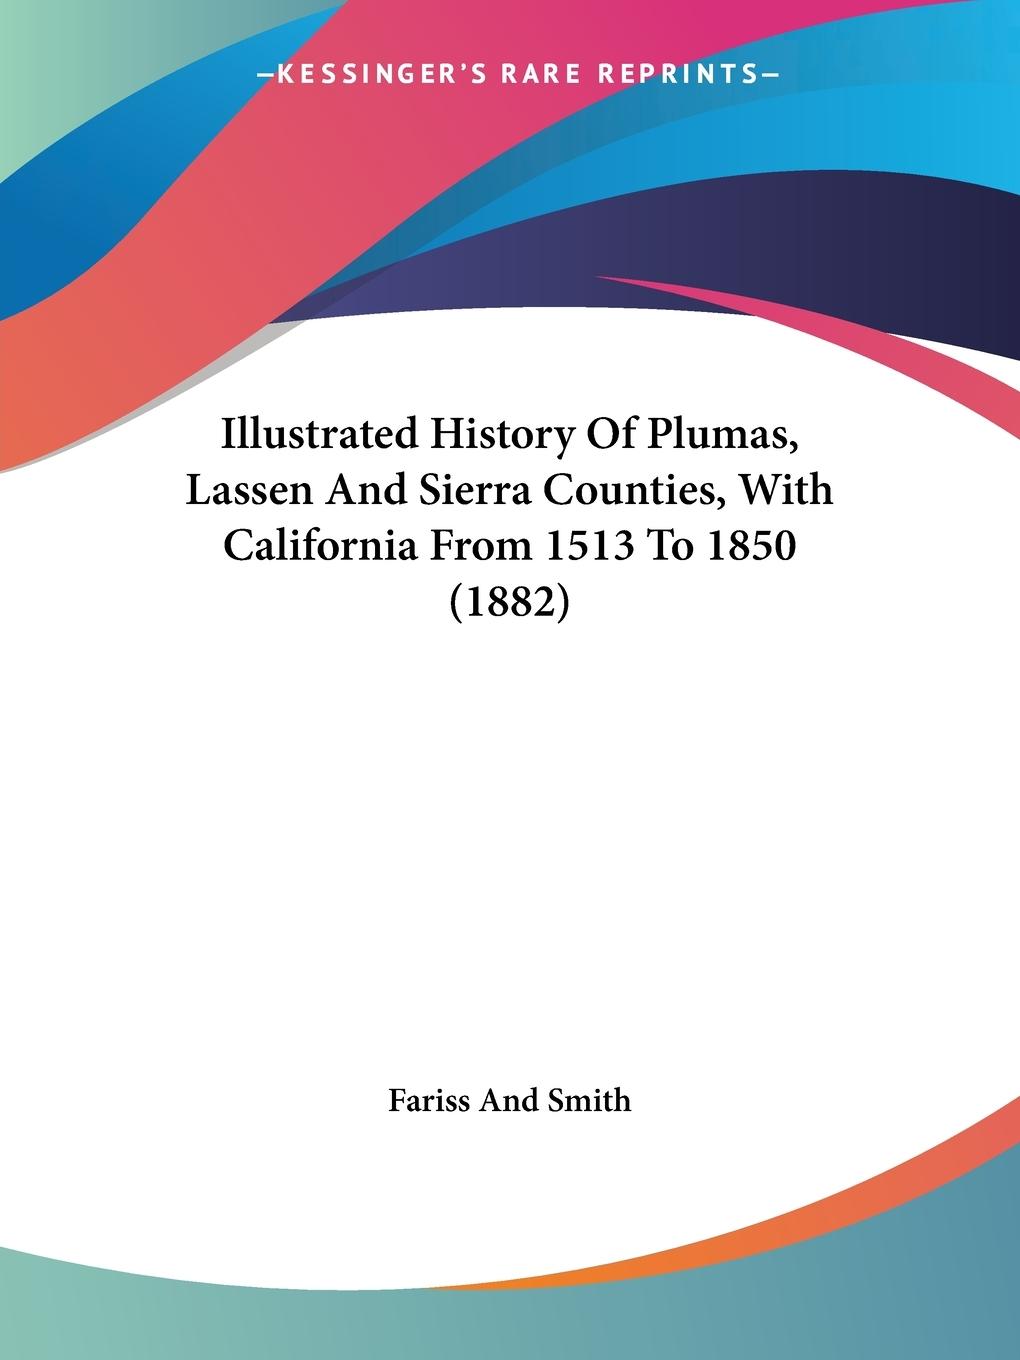 Illustrated History Of Plumas, Lassen And Sierra Counties, With California From 1513 To 1850 (1882) - Fariss And Smith